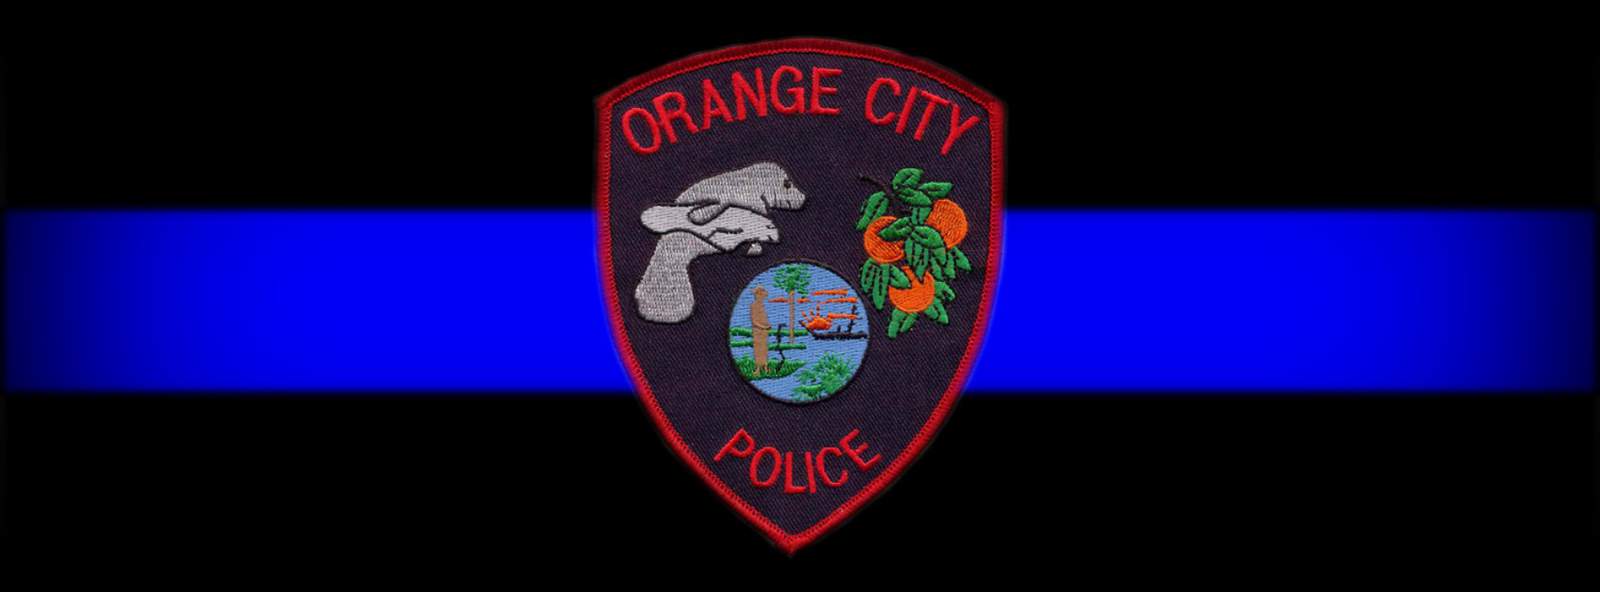 Orange City police officer dies unexpectedly, officials say